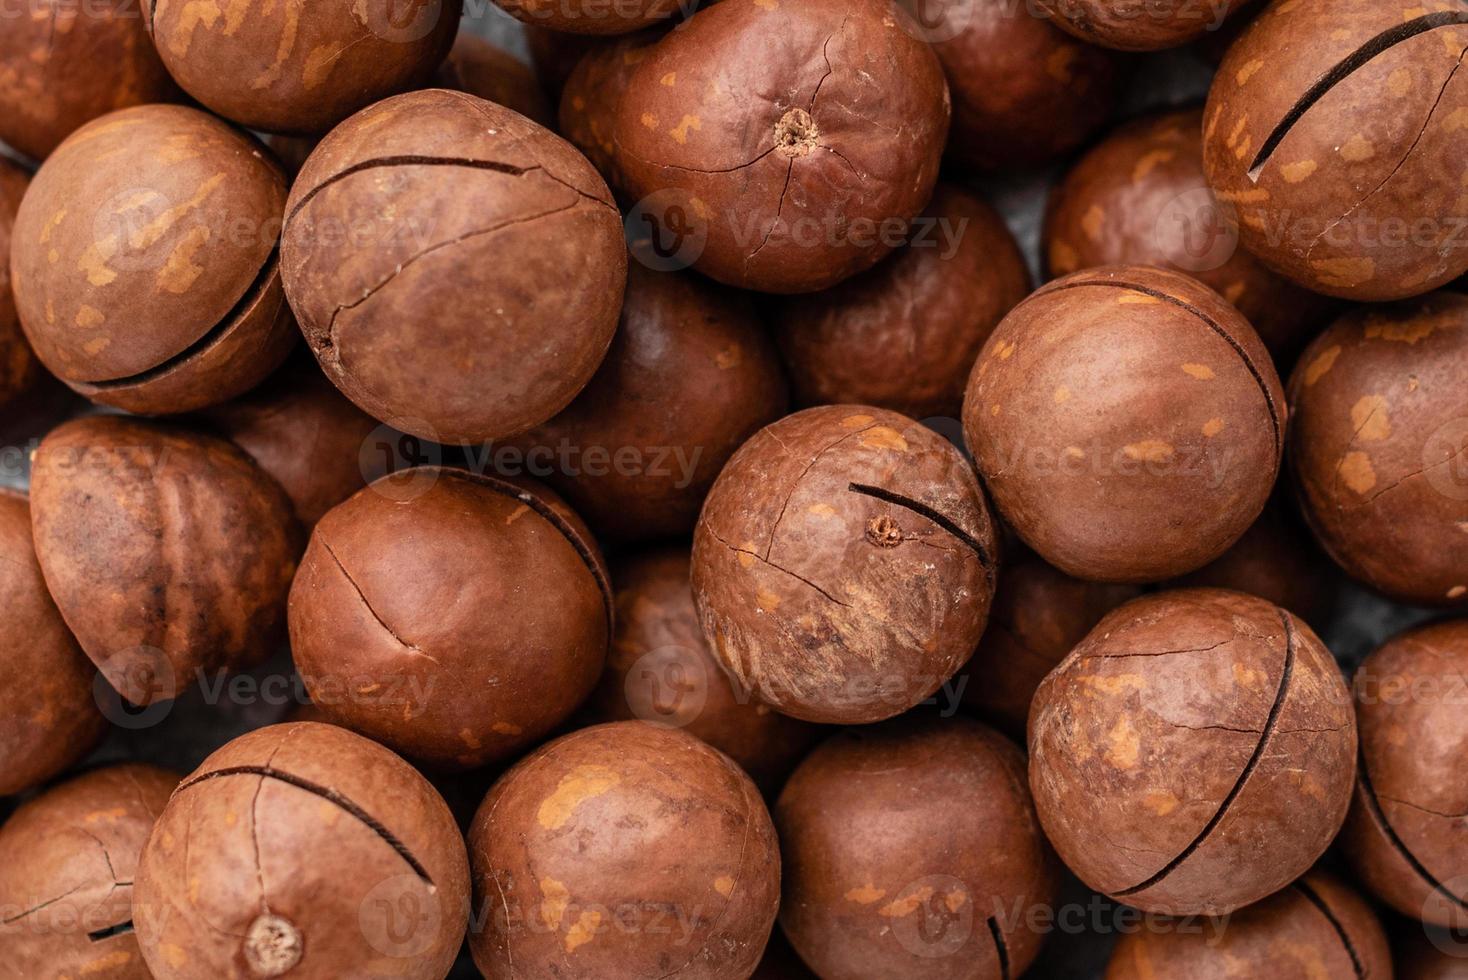 Macadamia nuts close up. It can be used as a background photo